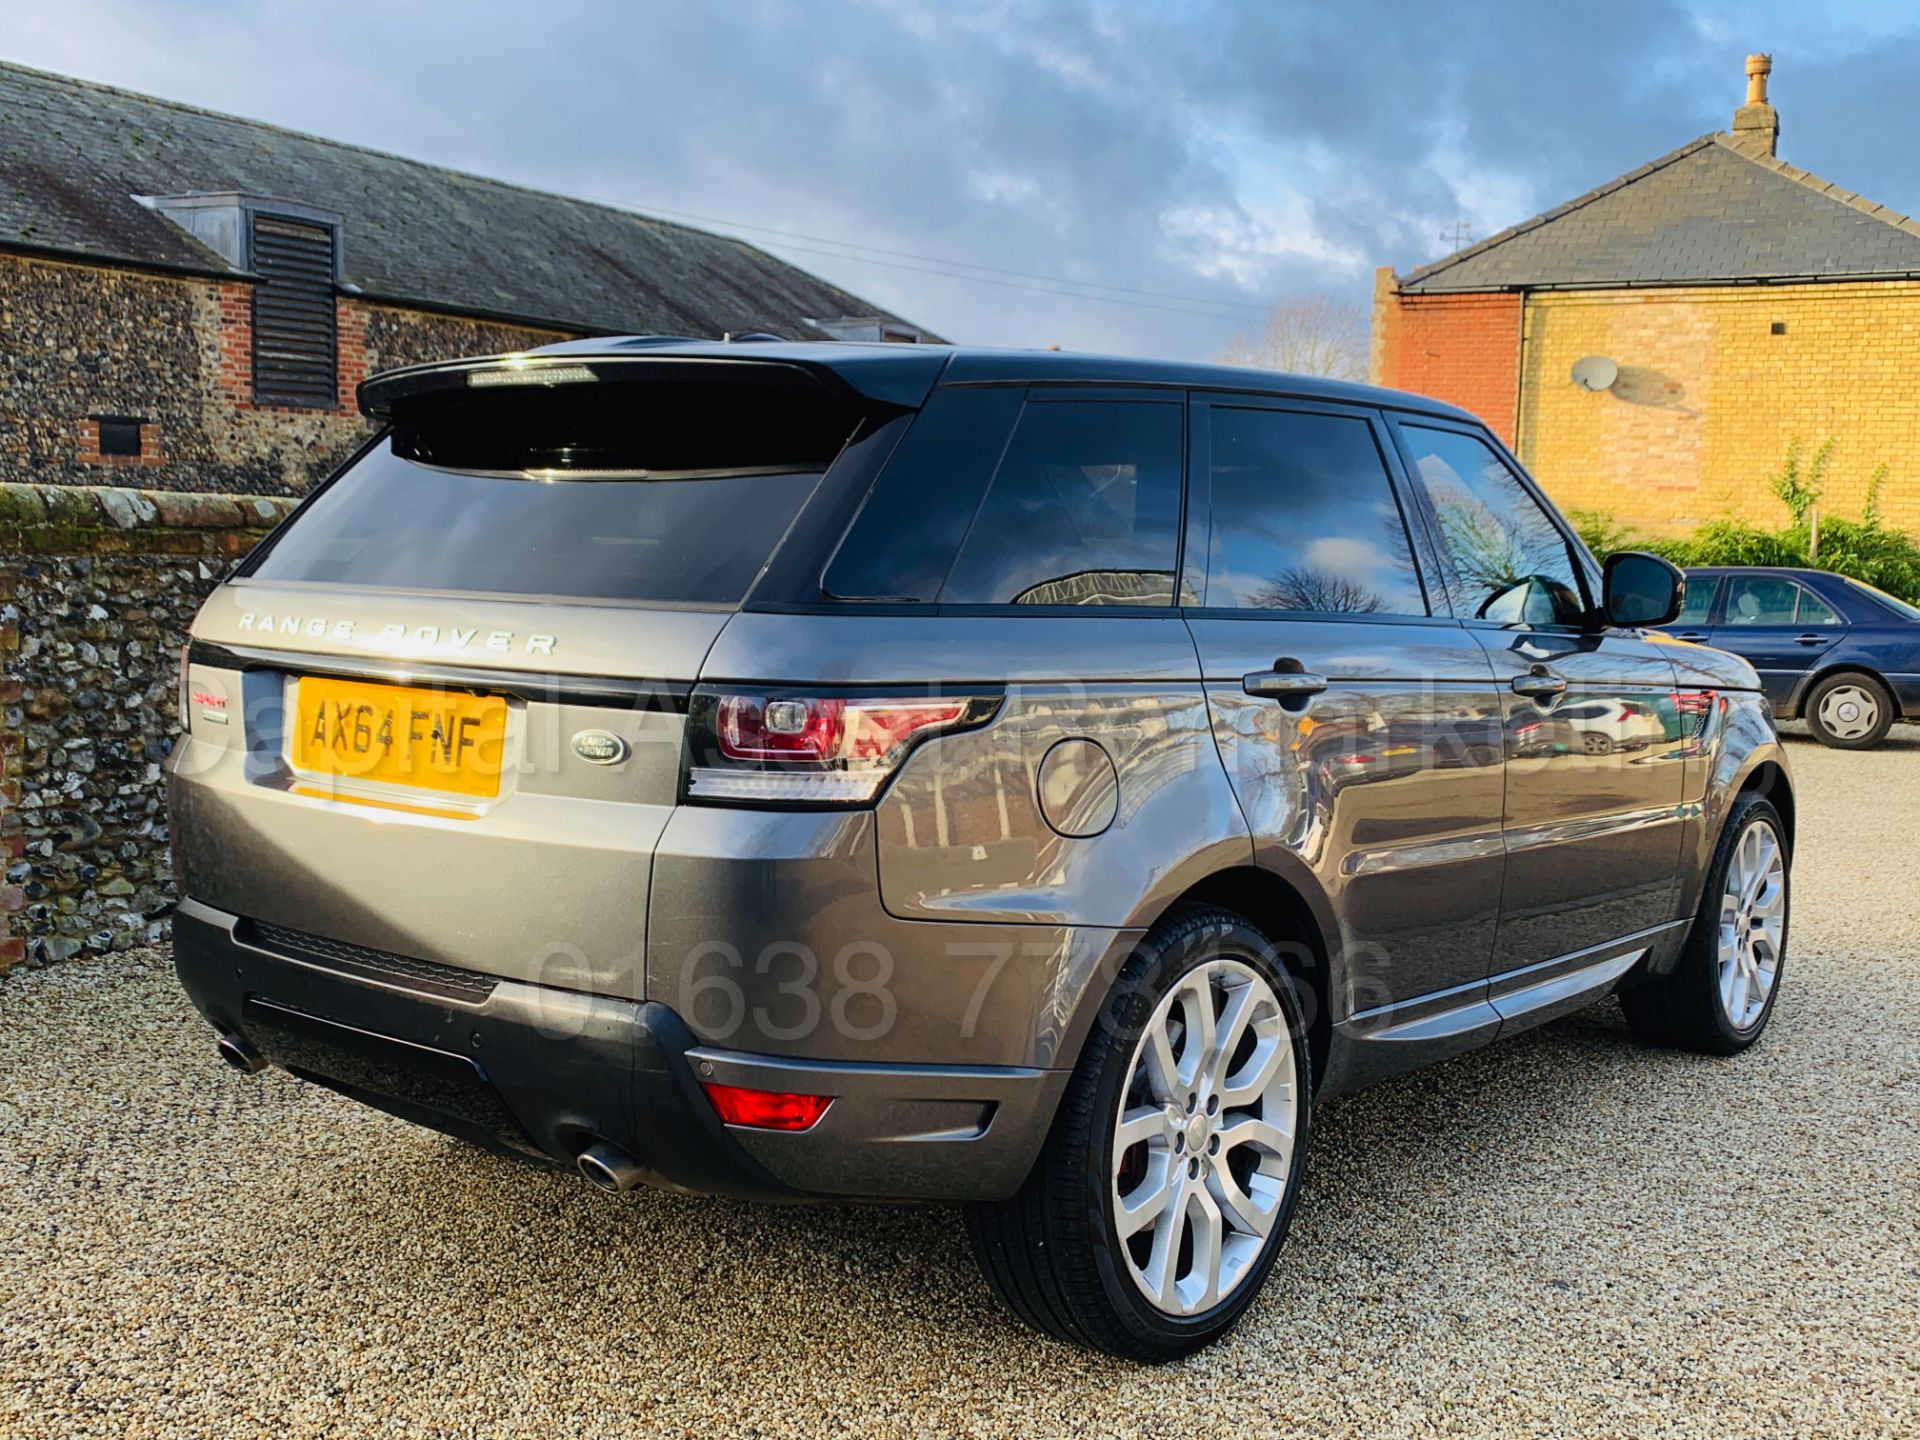 On Sale RANGE ROVER SPORT *AUTOBIOGRAPHY DYNAMIC* (2015 MODEL) '3.0 SDV6 - 8 SPEED AUTO' HIGE SPEC - Image 18 of 85